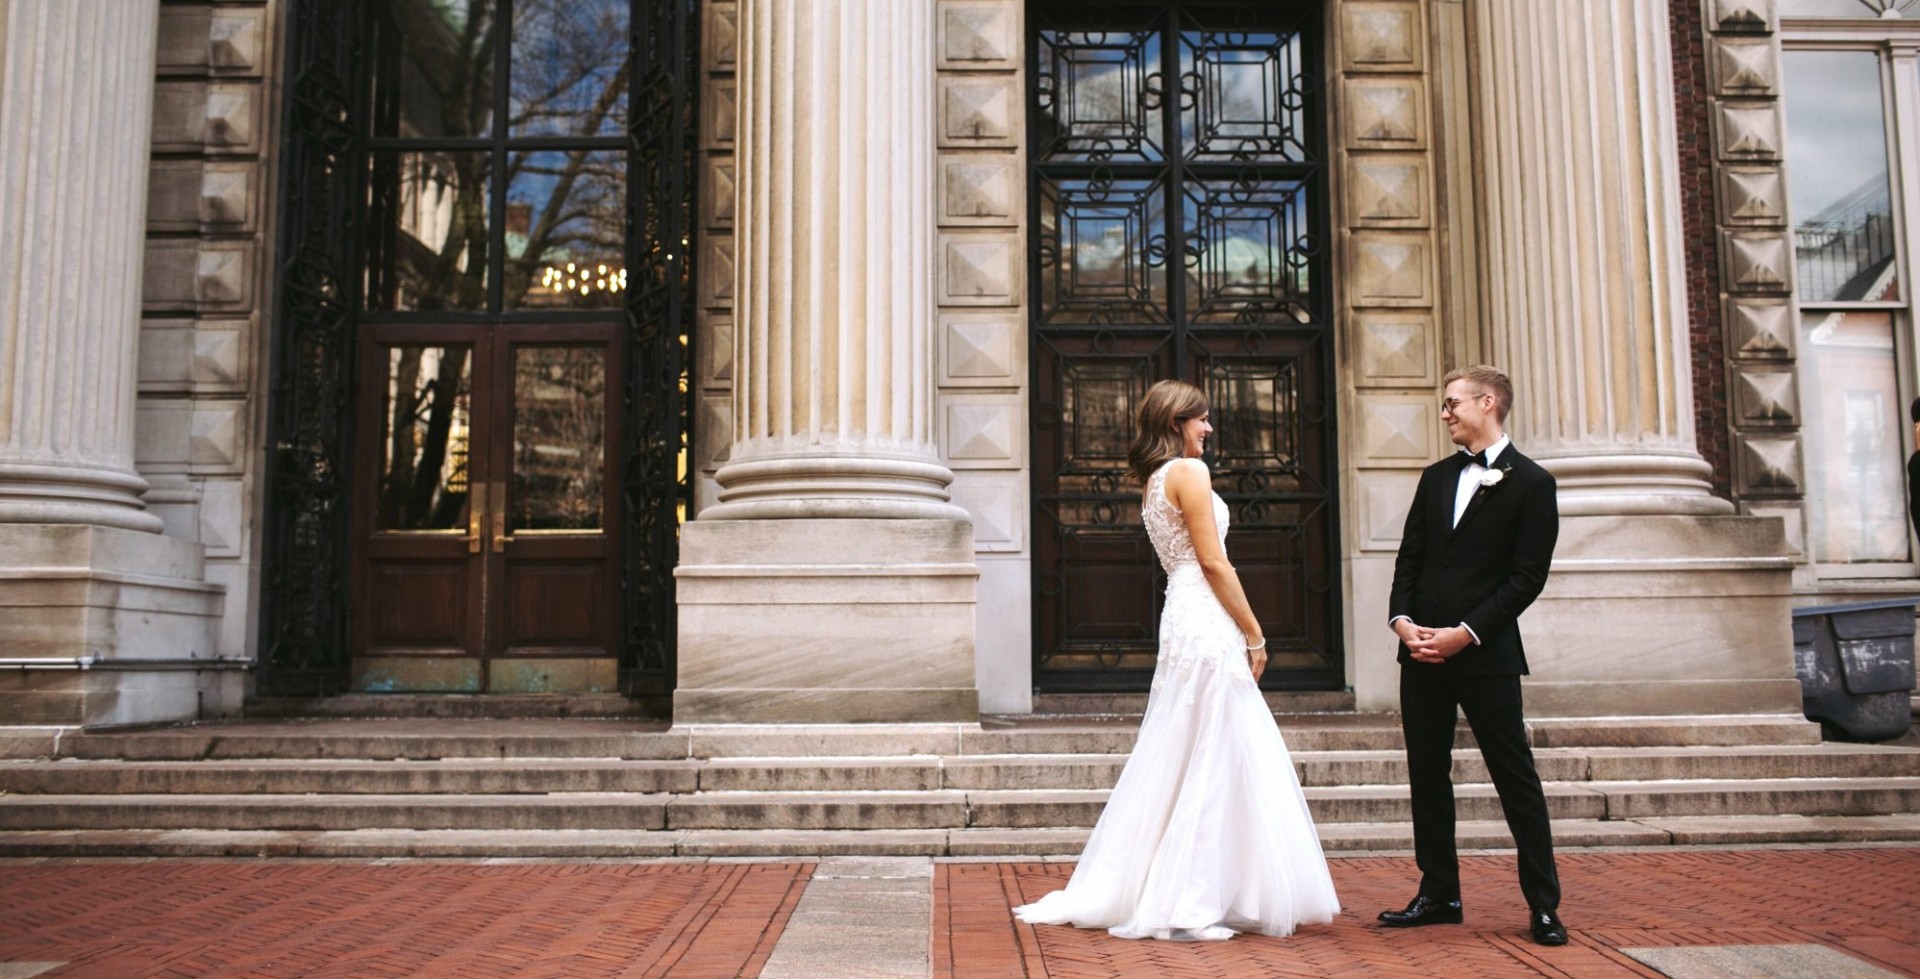 A bride and groom experience their first look